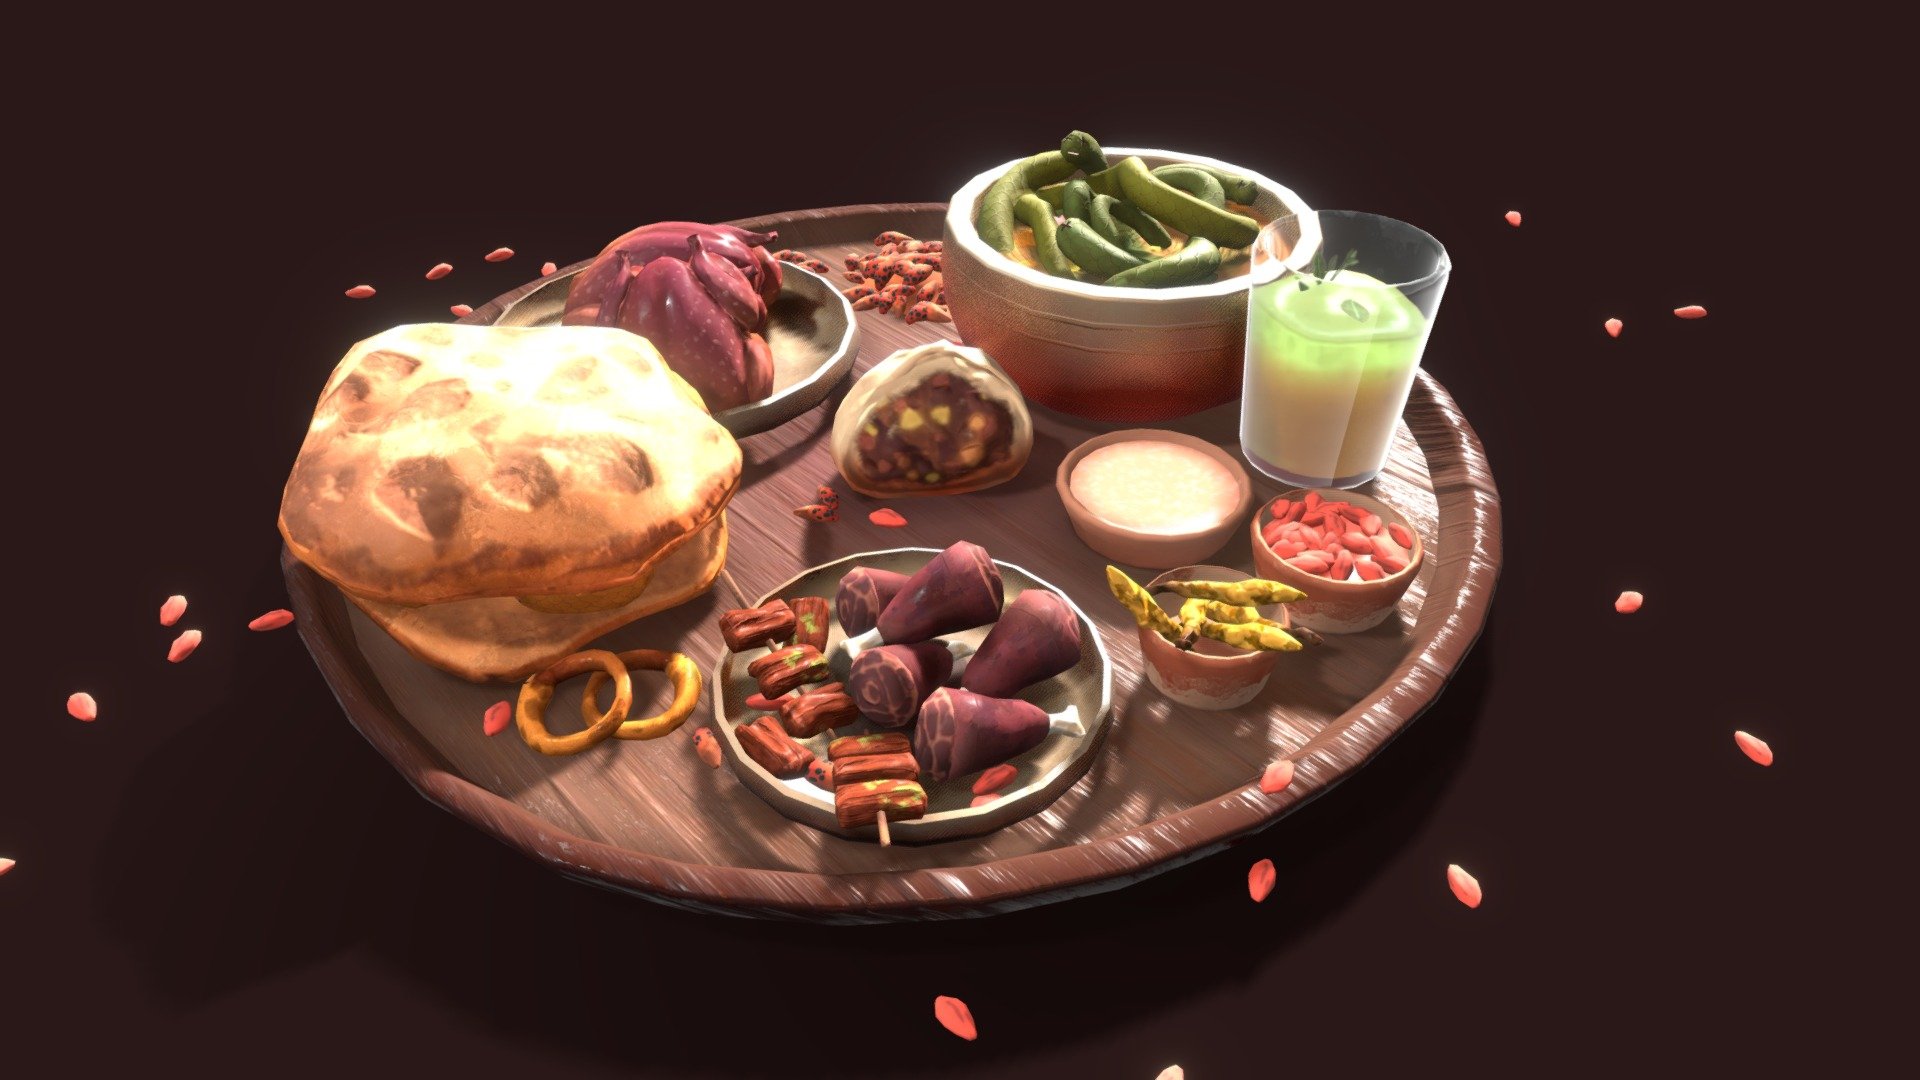 Red Panda Feast

On the menu

Fried bred and is snake, Ouroboros manners
Rat's leg of lamb
Skewer of mice
Mushroom and bird brioche
Bamboo tea with milk
Roasted birds
Snakes noodles
Goji, bugs and mushroom
Fruit yoghurt - Ailurus Feast ! - 3D model by Cokatieki (@Nerakess) 3d model